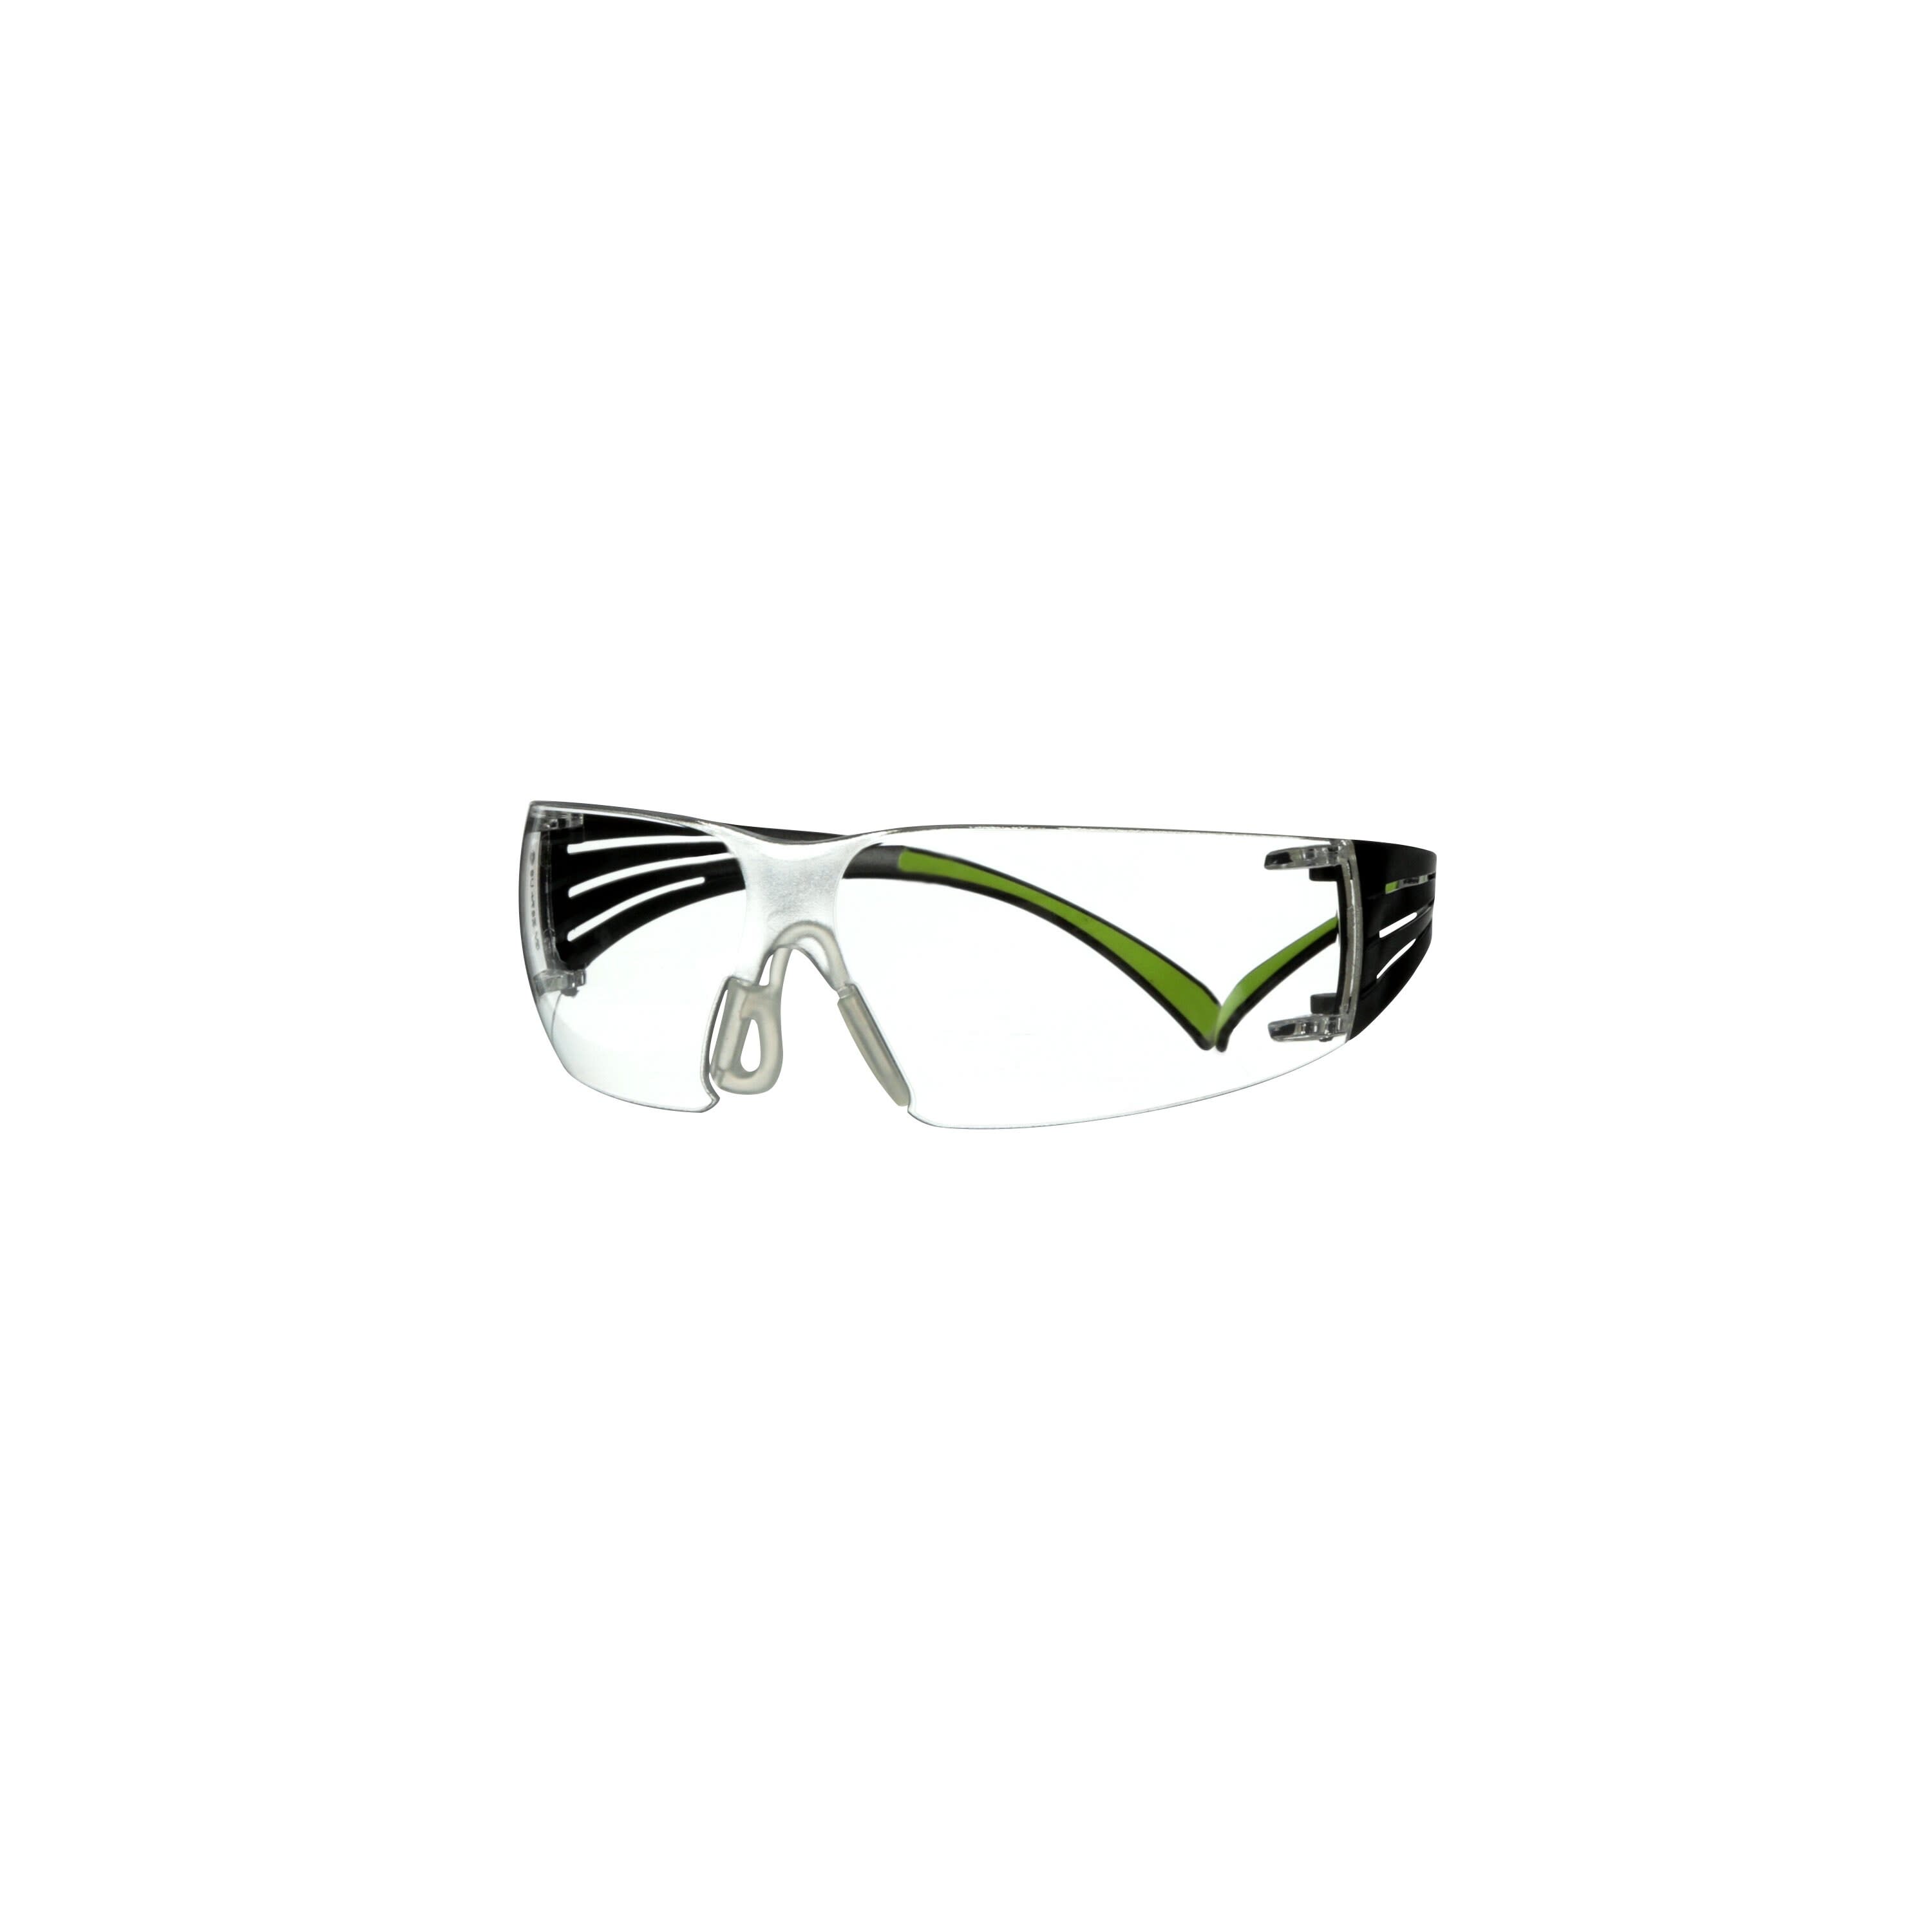 3M SecureFit Plastic Anti-Fog Safety Glasses in the Eye Protection  department at